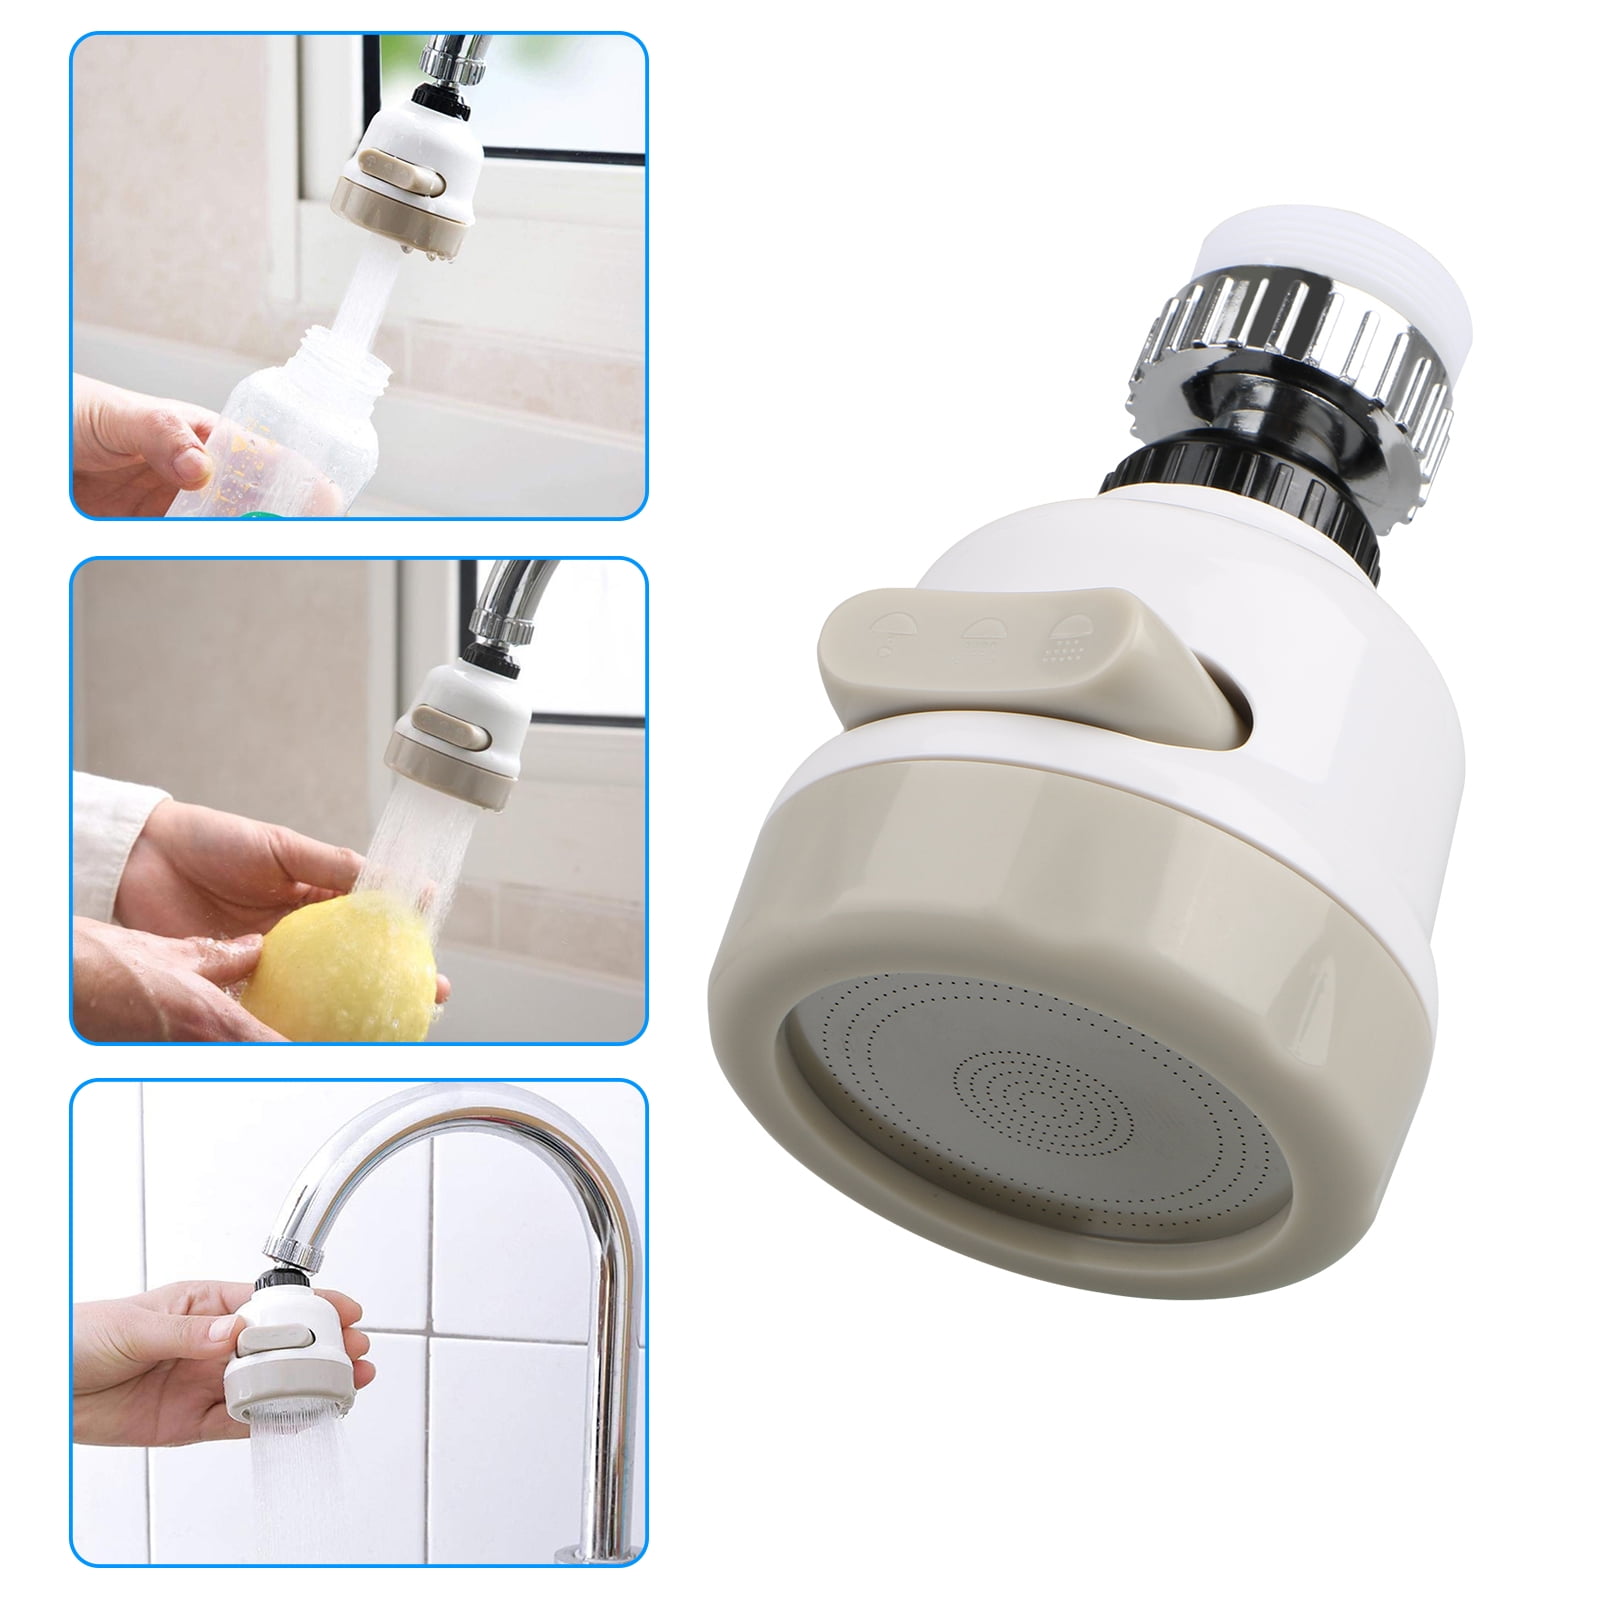 Details about   360 Degree Adjustable Rotate Faucet Nozzle Filter For Kitchen Sprayer Head Taps 